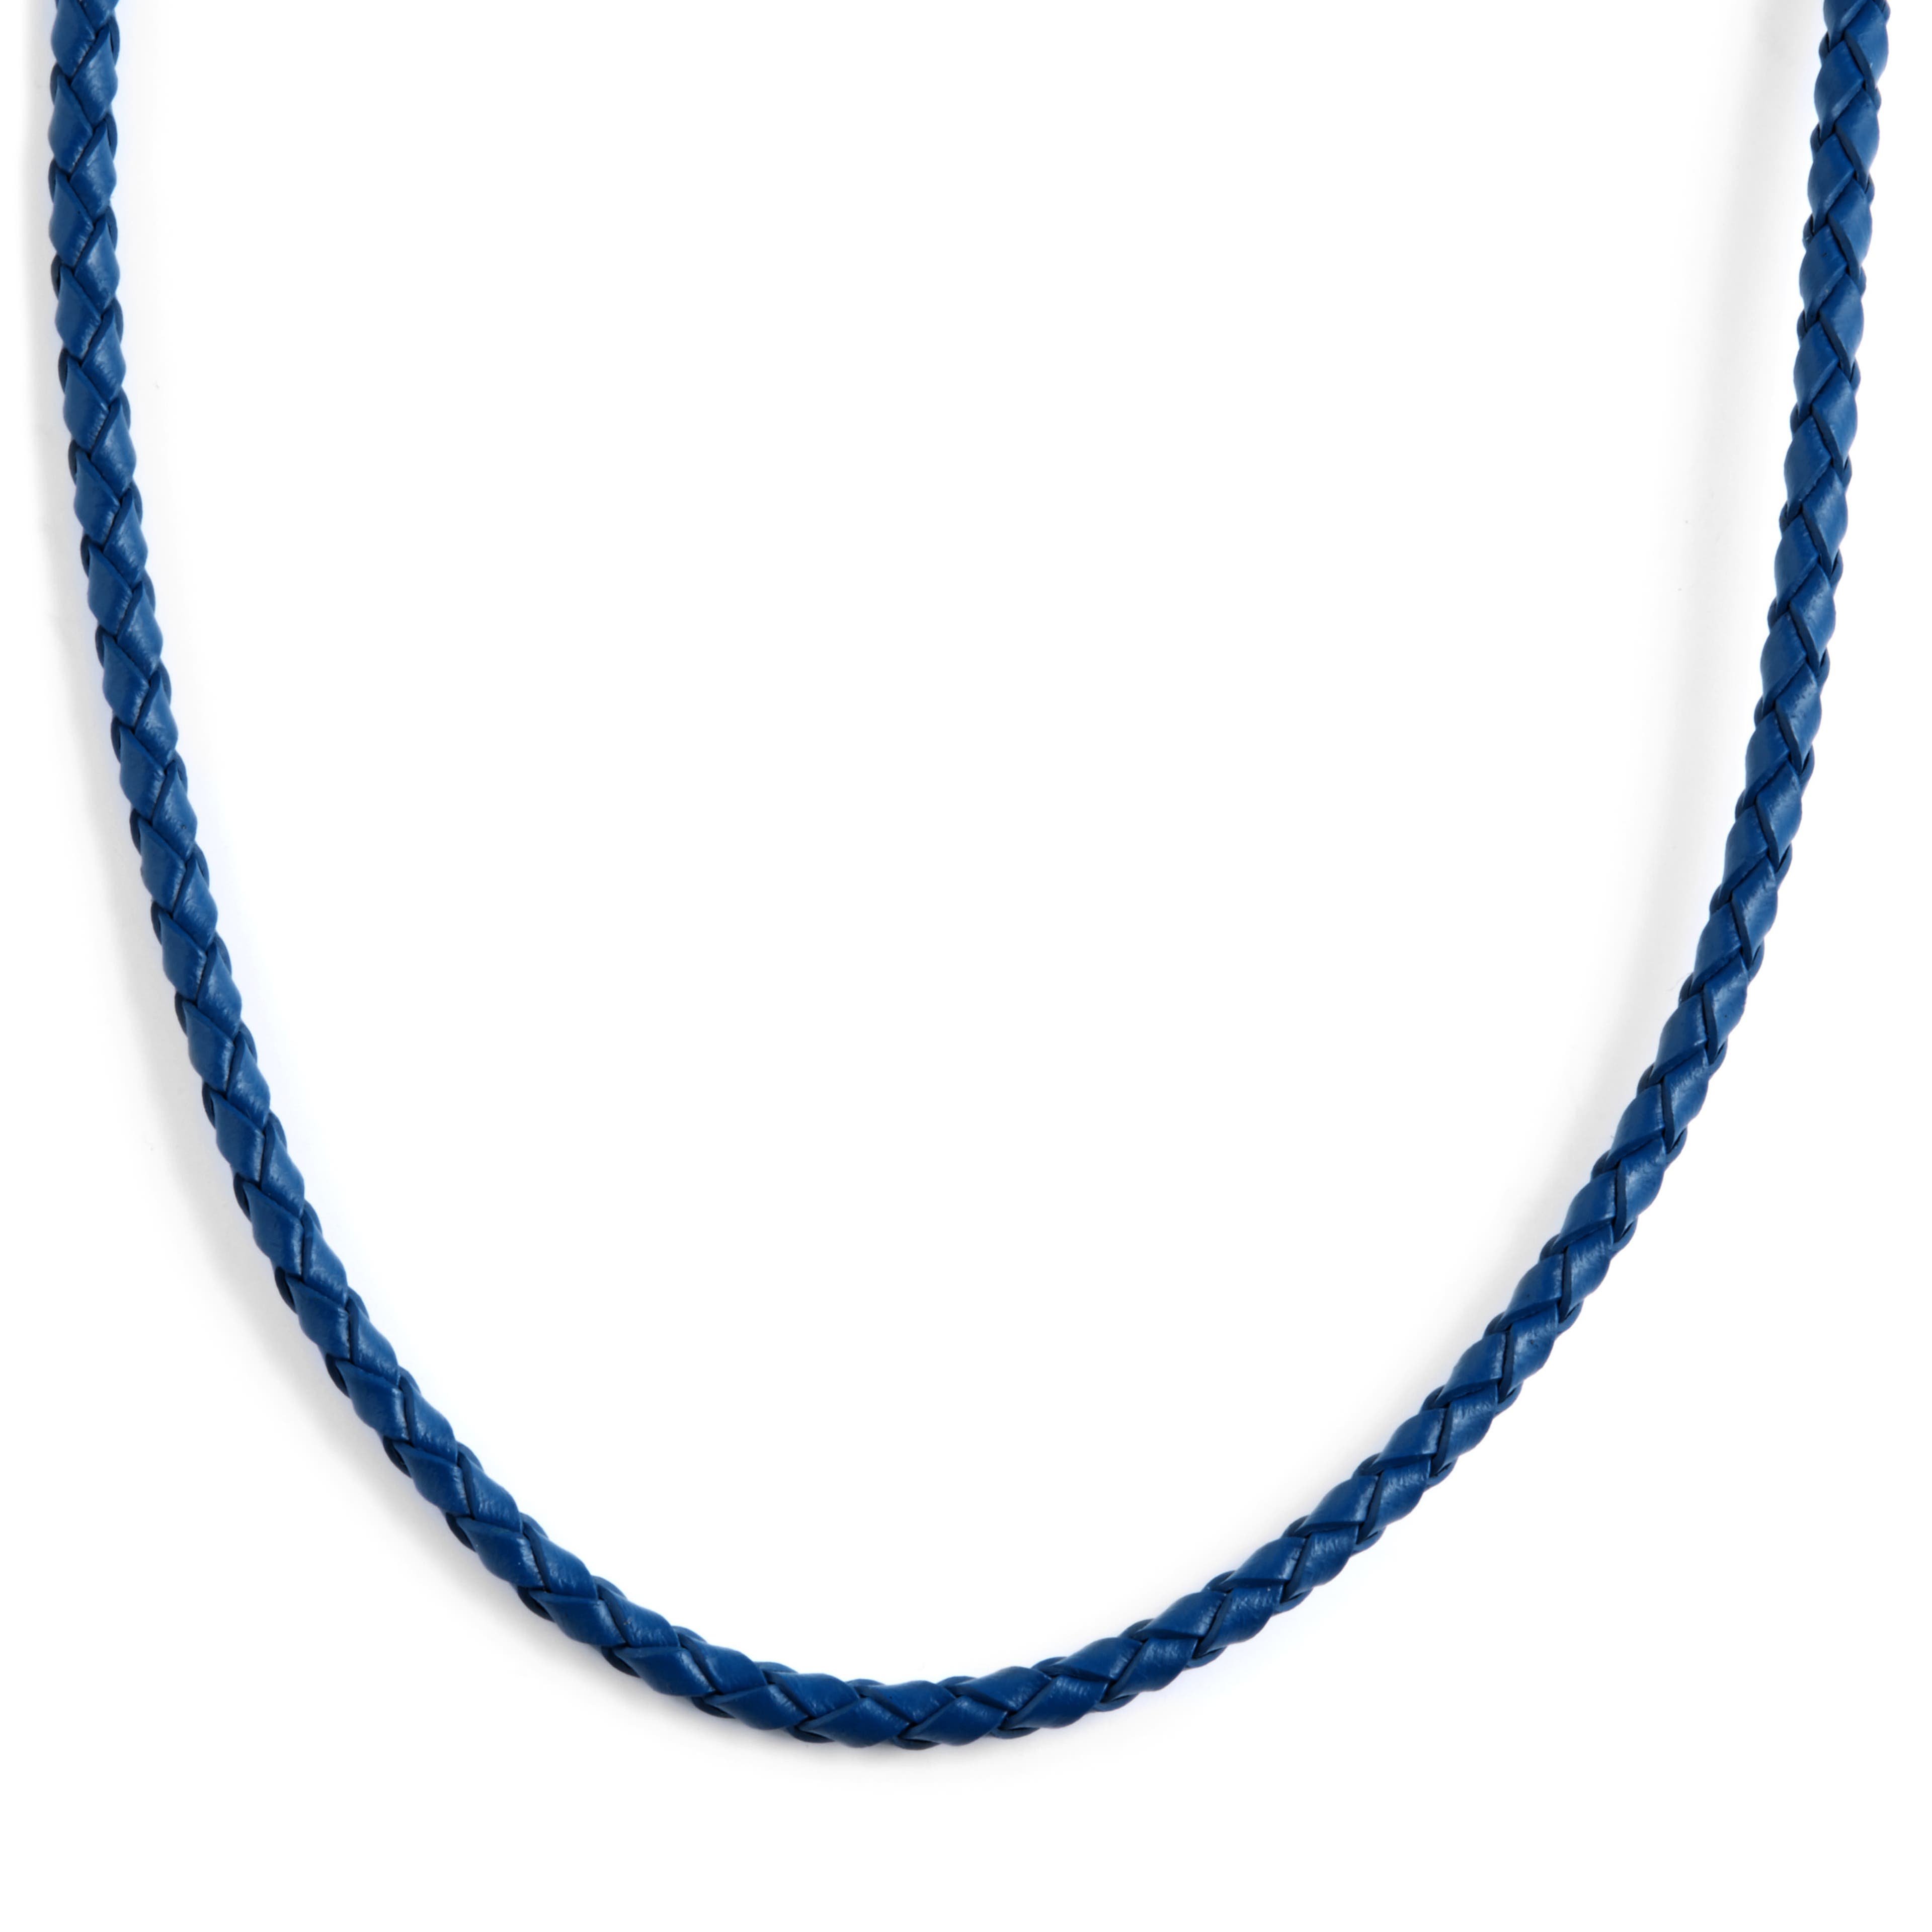 3 mm Blue Woven Leather Necklace